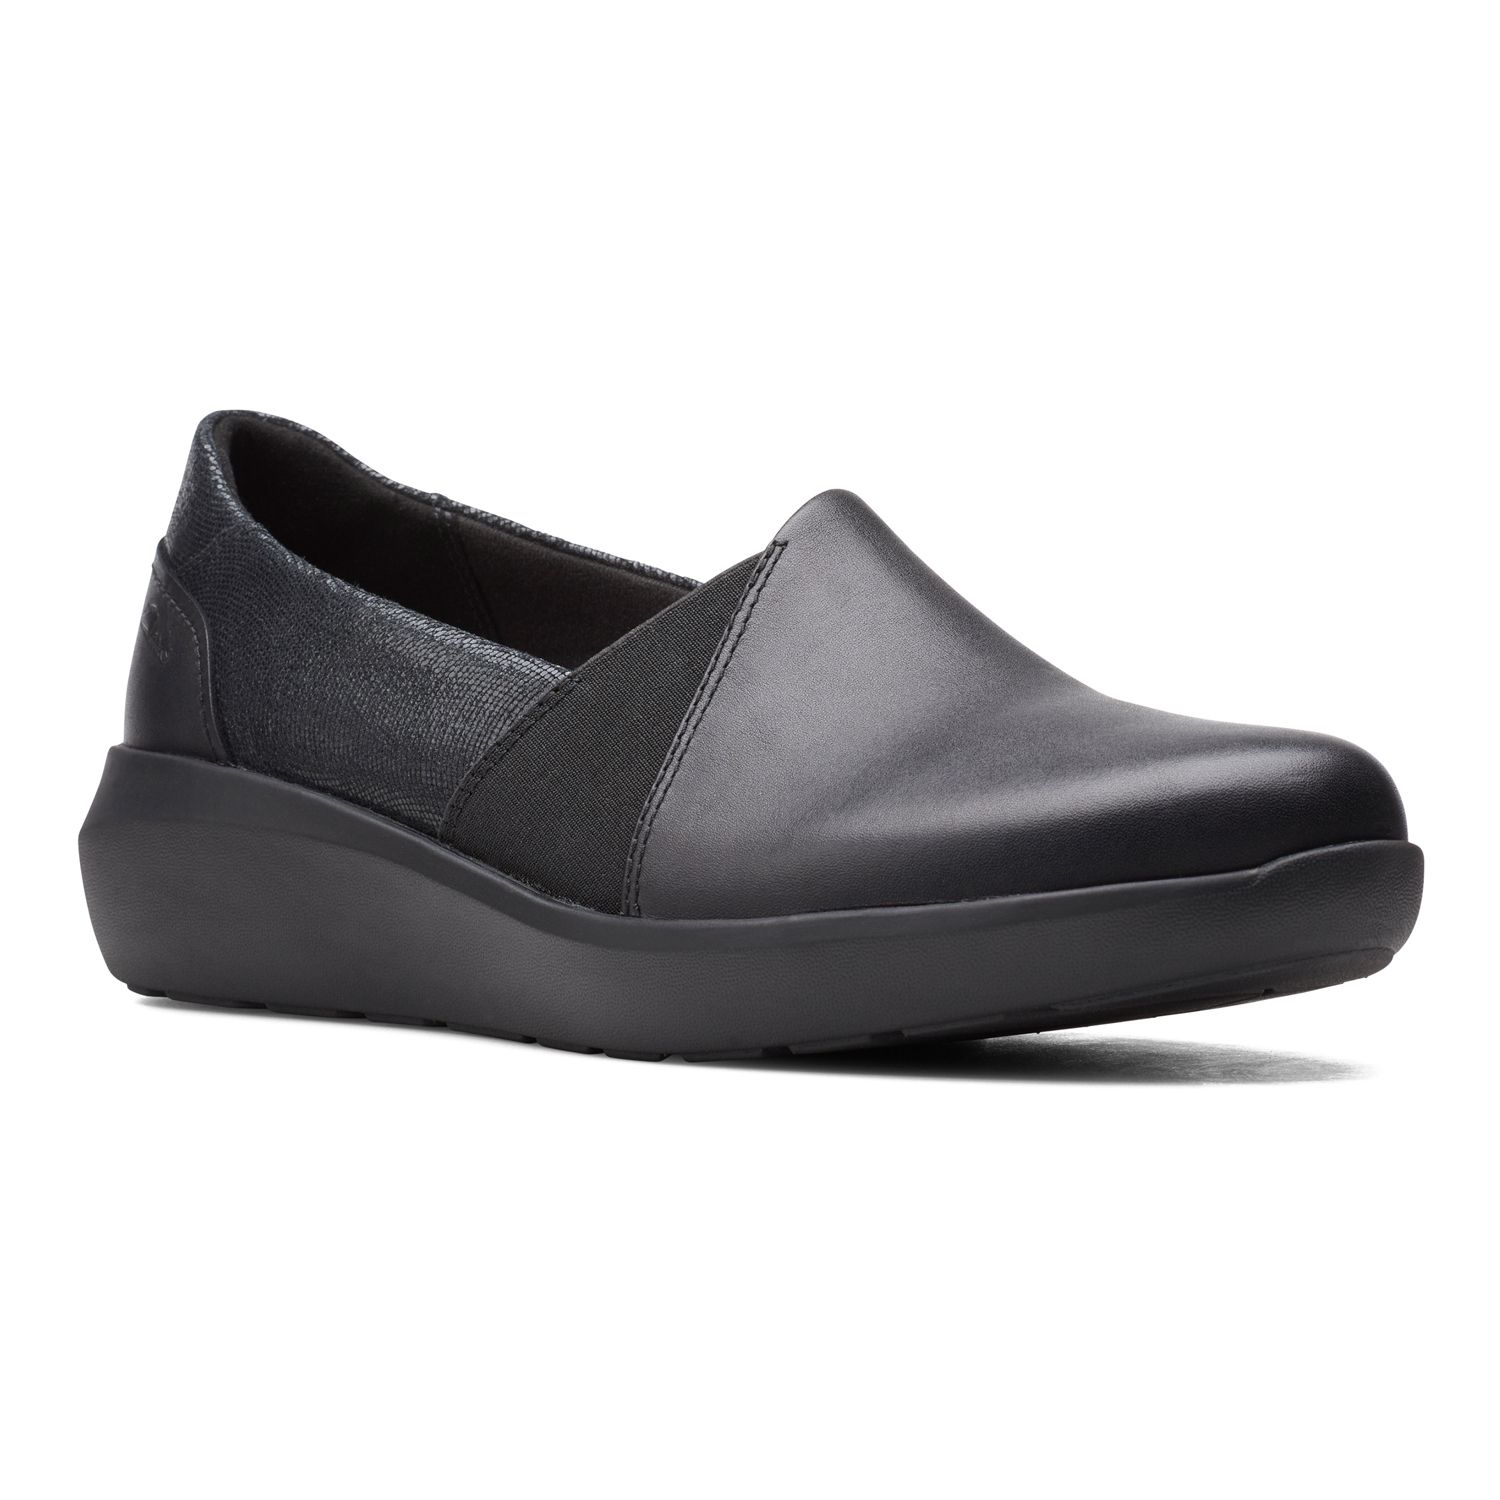 clarks black loafers womens